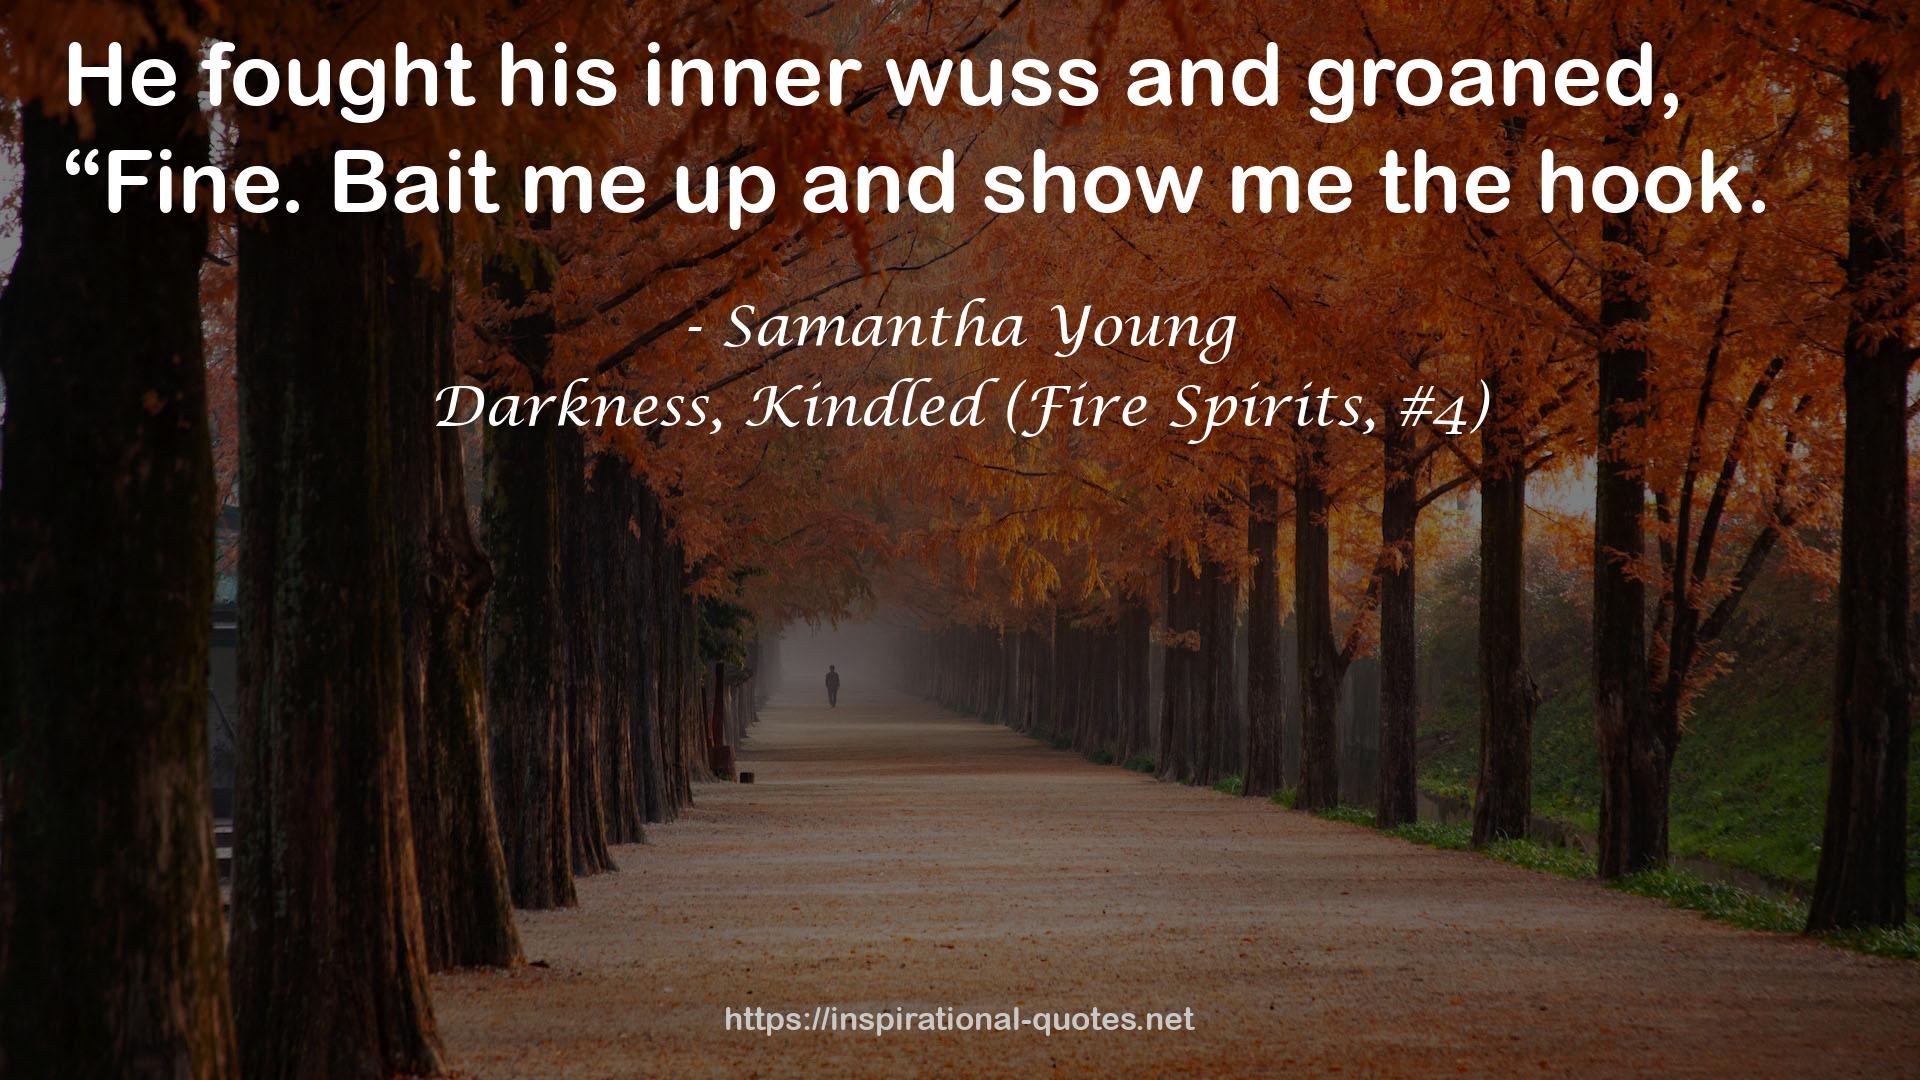 Darkness, Kindled (Fire Spirits, #4) QUOTES